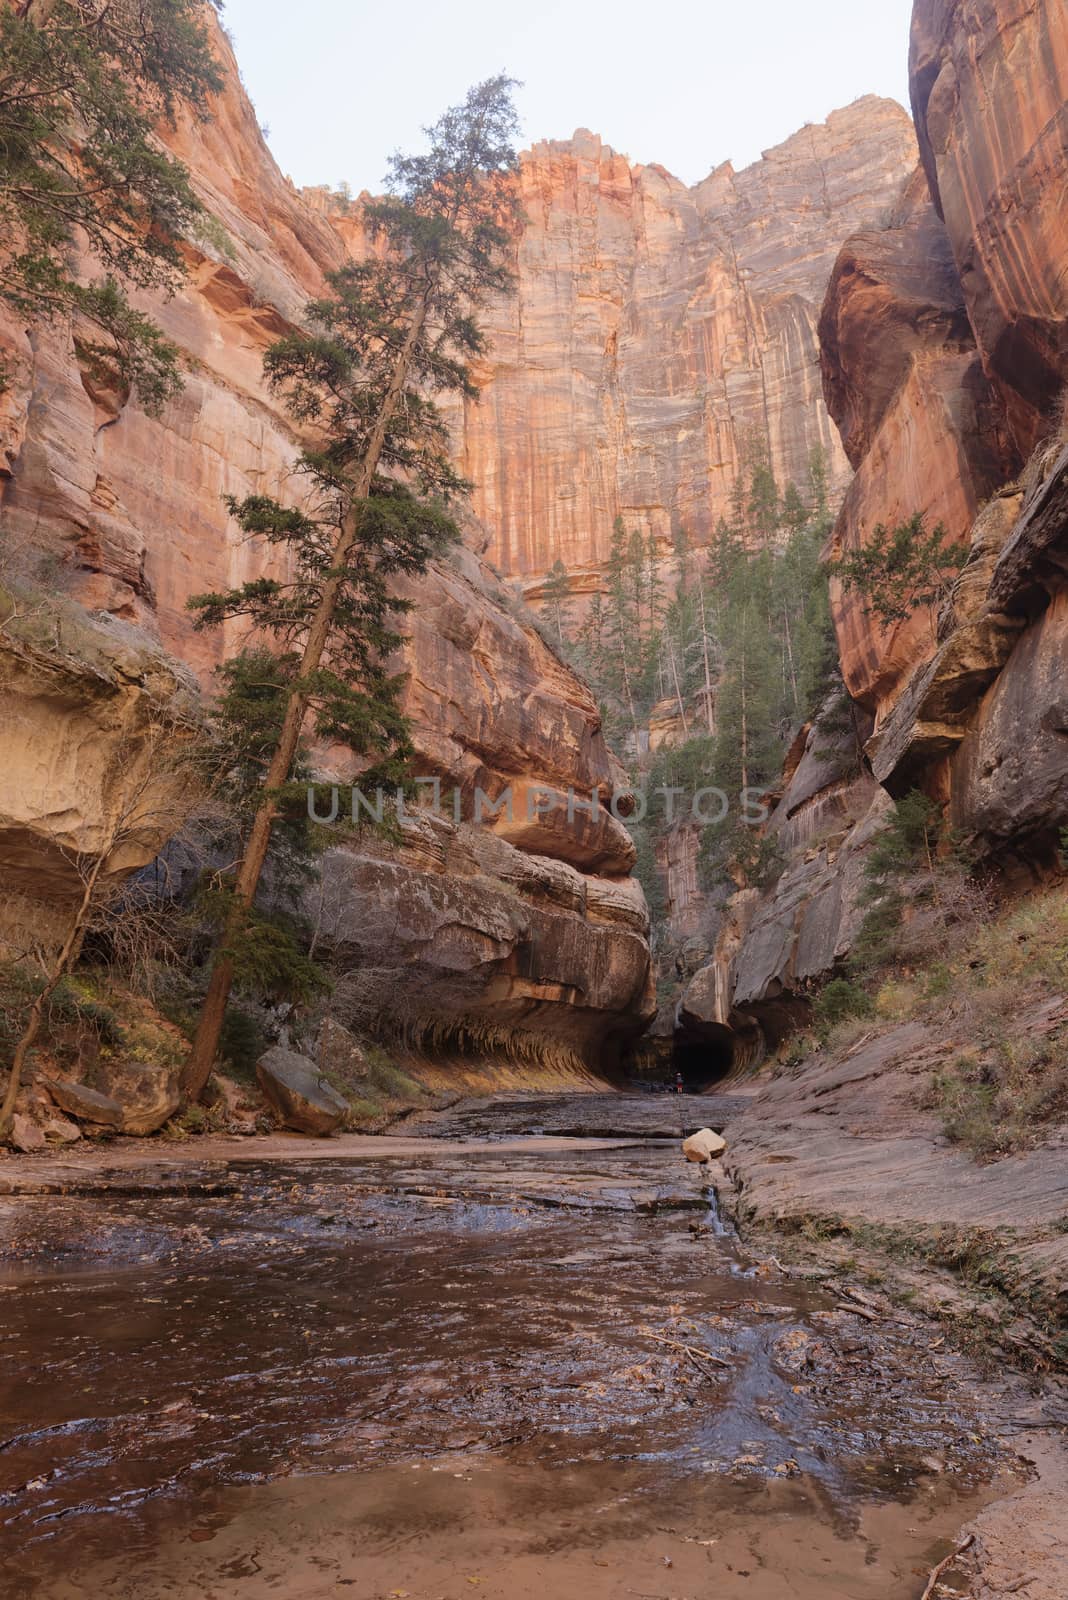 The dark entrance to the famous Subway, a famous slot canyon in the Left Fork North Creek, Zion National Park.